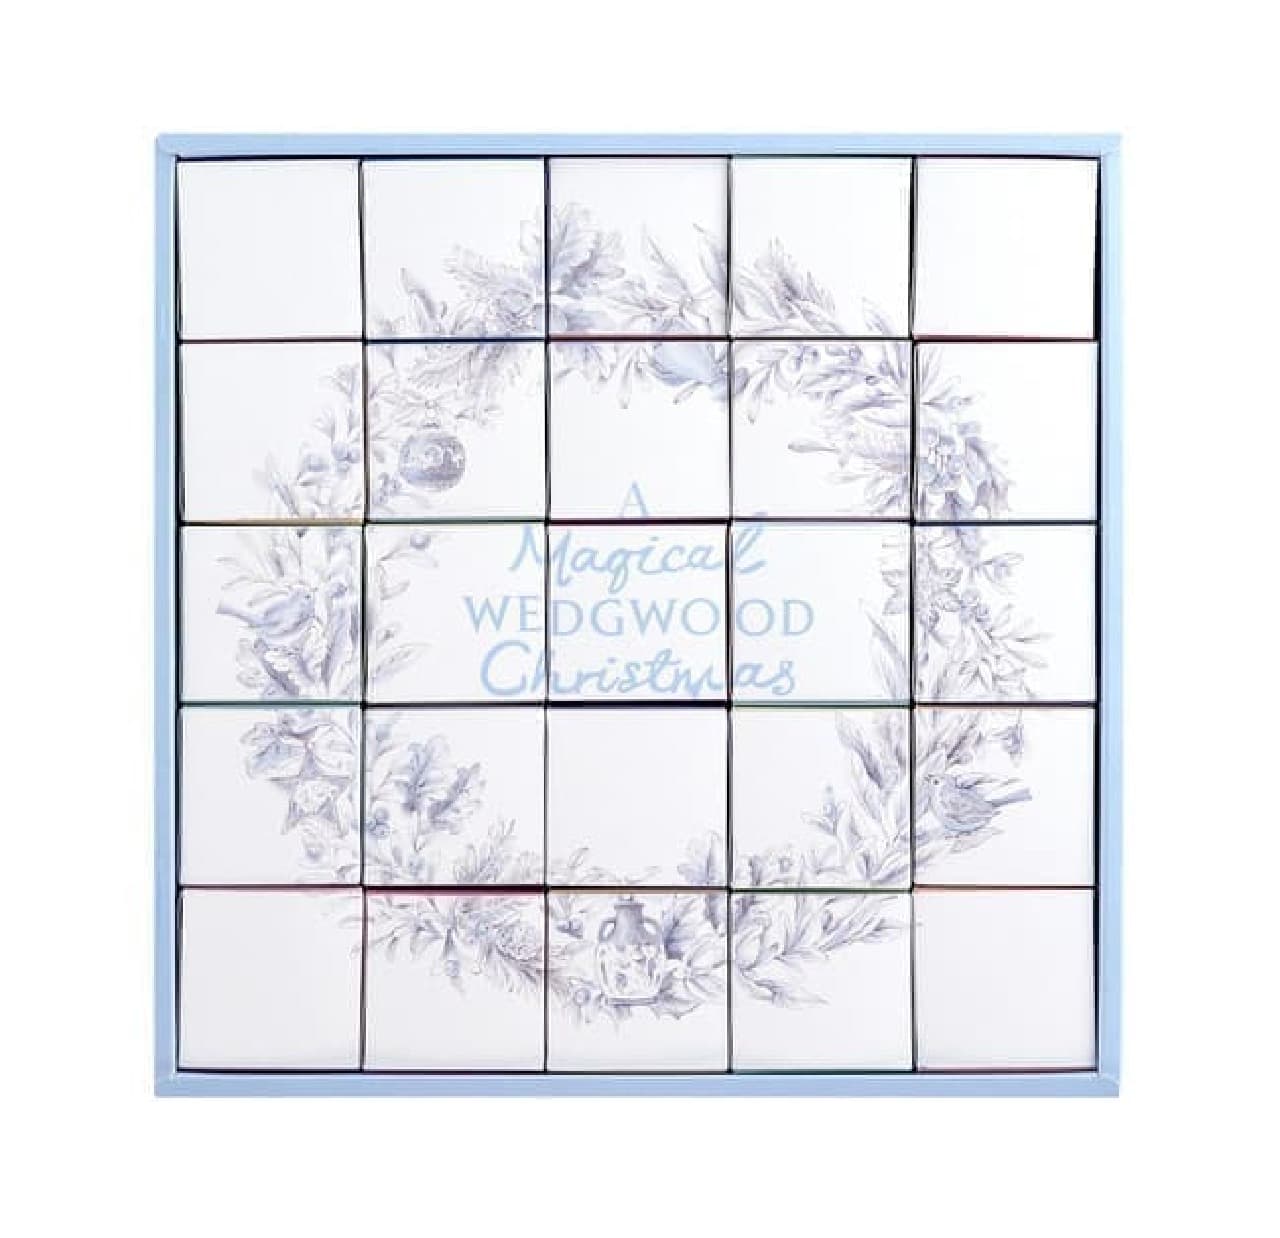 Wedgwood "Advent Tea Calendar" is available in limited quantities--25 types of tea to enjoy while waiting for Christmas